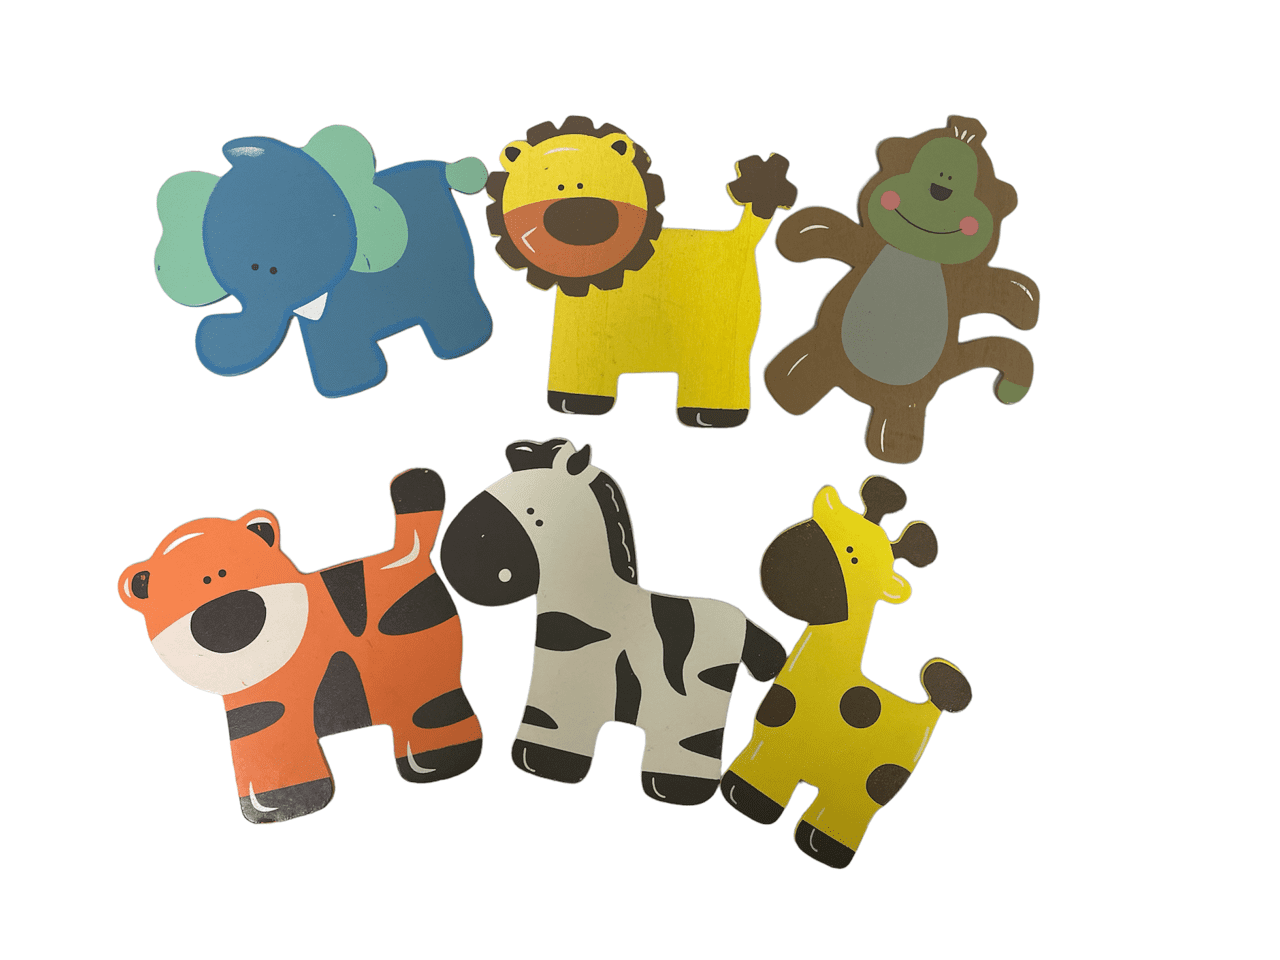 Charmed Assorted Wooden Animal Ornaments Monkey, Giraffe, Tiger, Lion,  Elephant and Zebra for Safari / Jungle Themed, Baby Room Decor, 6 Pieces -  